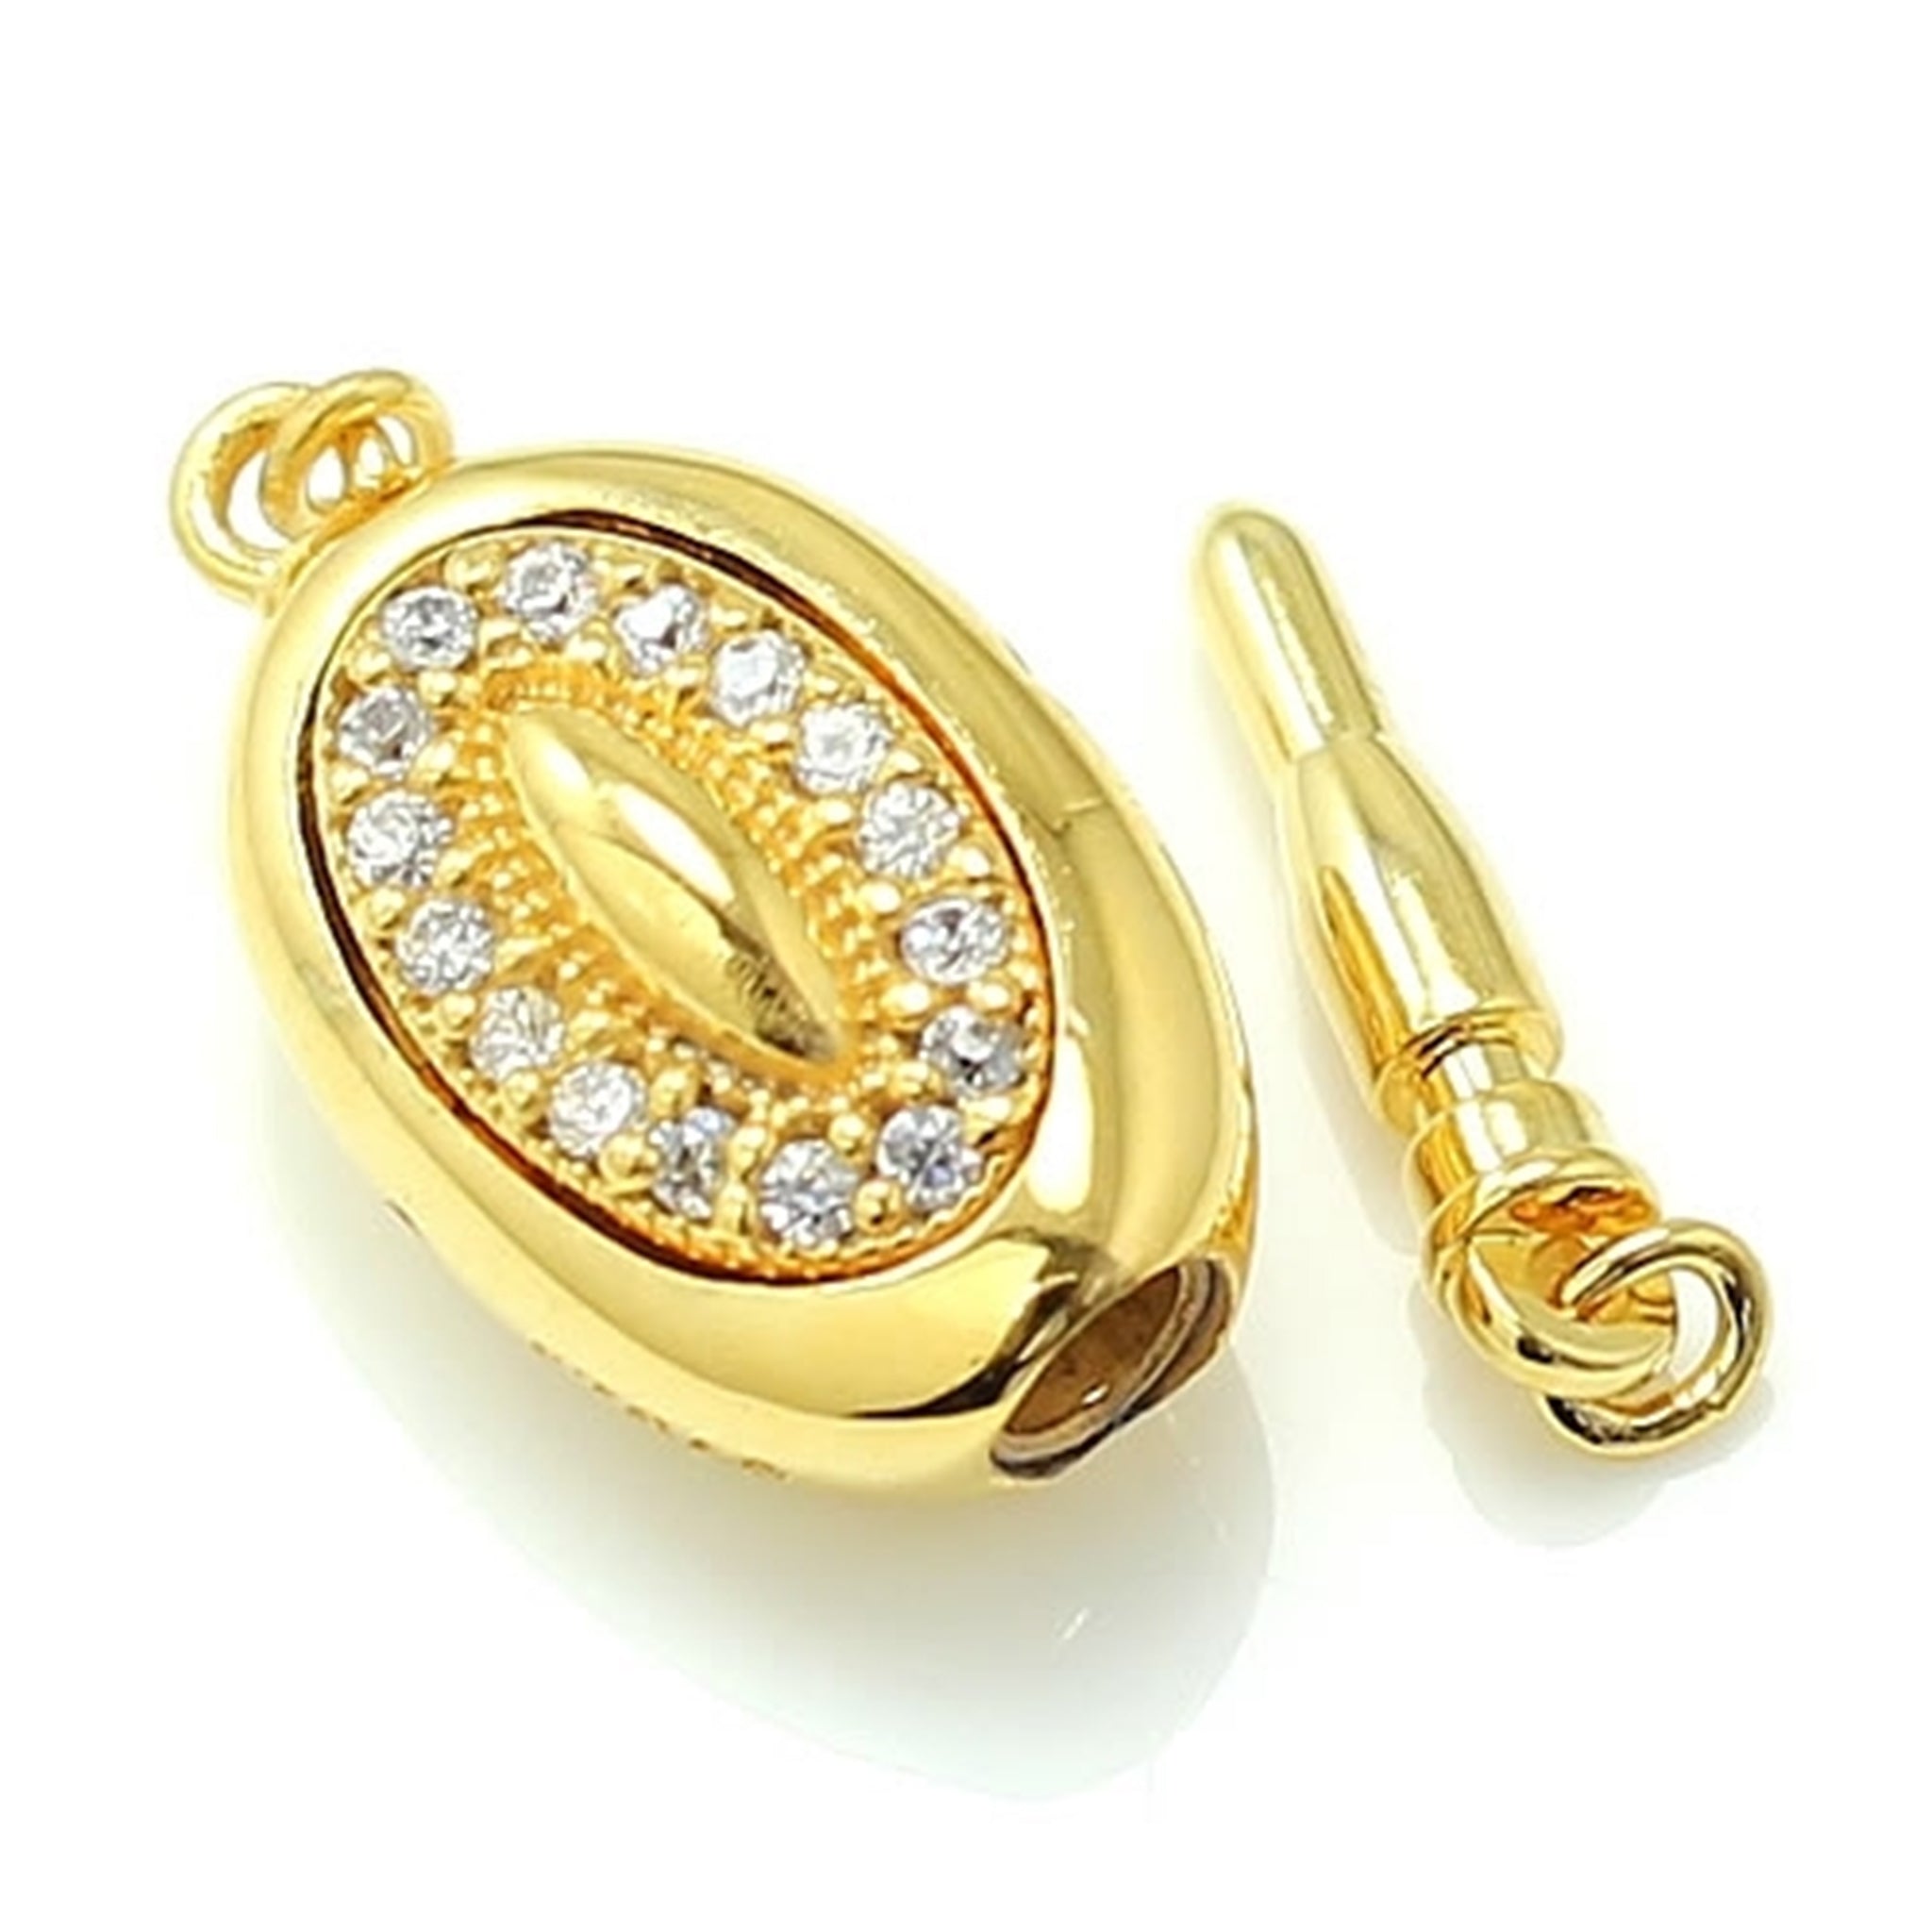 Gold Plated Push-Button Clasp with Cubic Zirconia Inlays in Sterling Silver 19.2x9.8mm